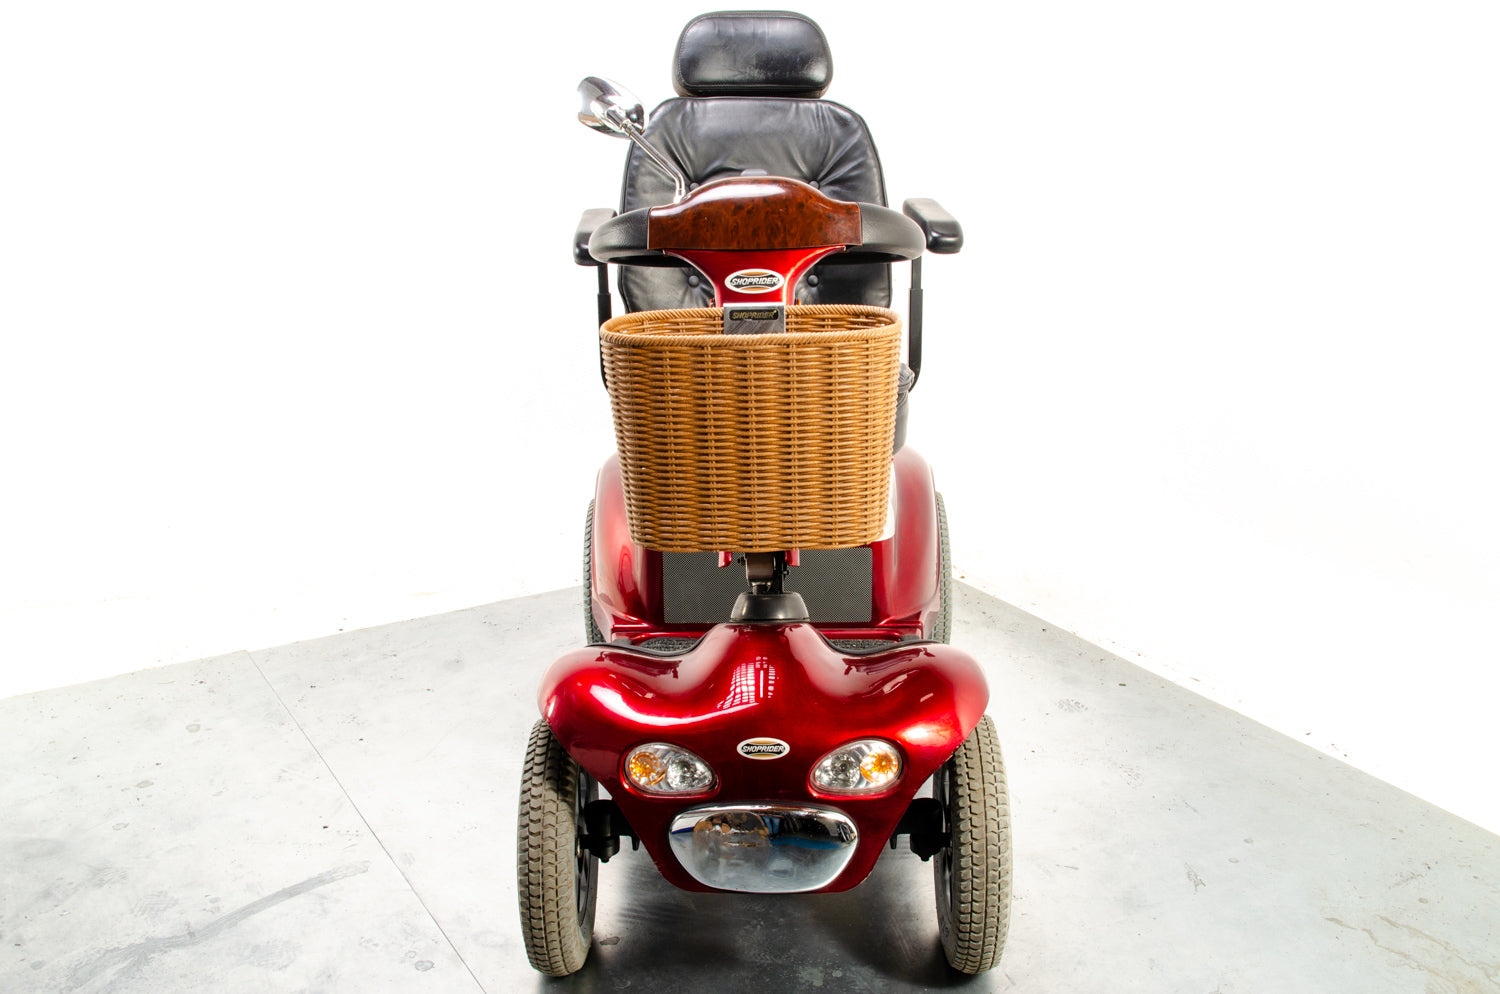 Shoprider Cordoba Off-Road All-Terrain Used Mobility Scooter Large 8mph Roma Red 13954